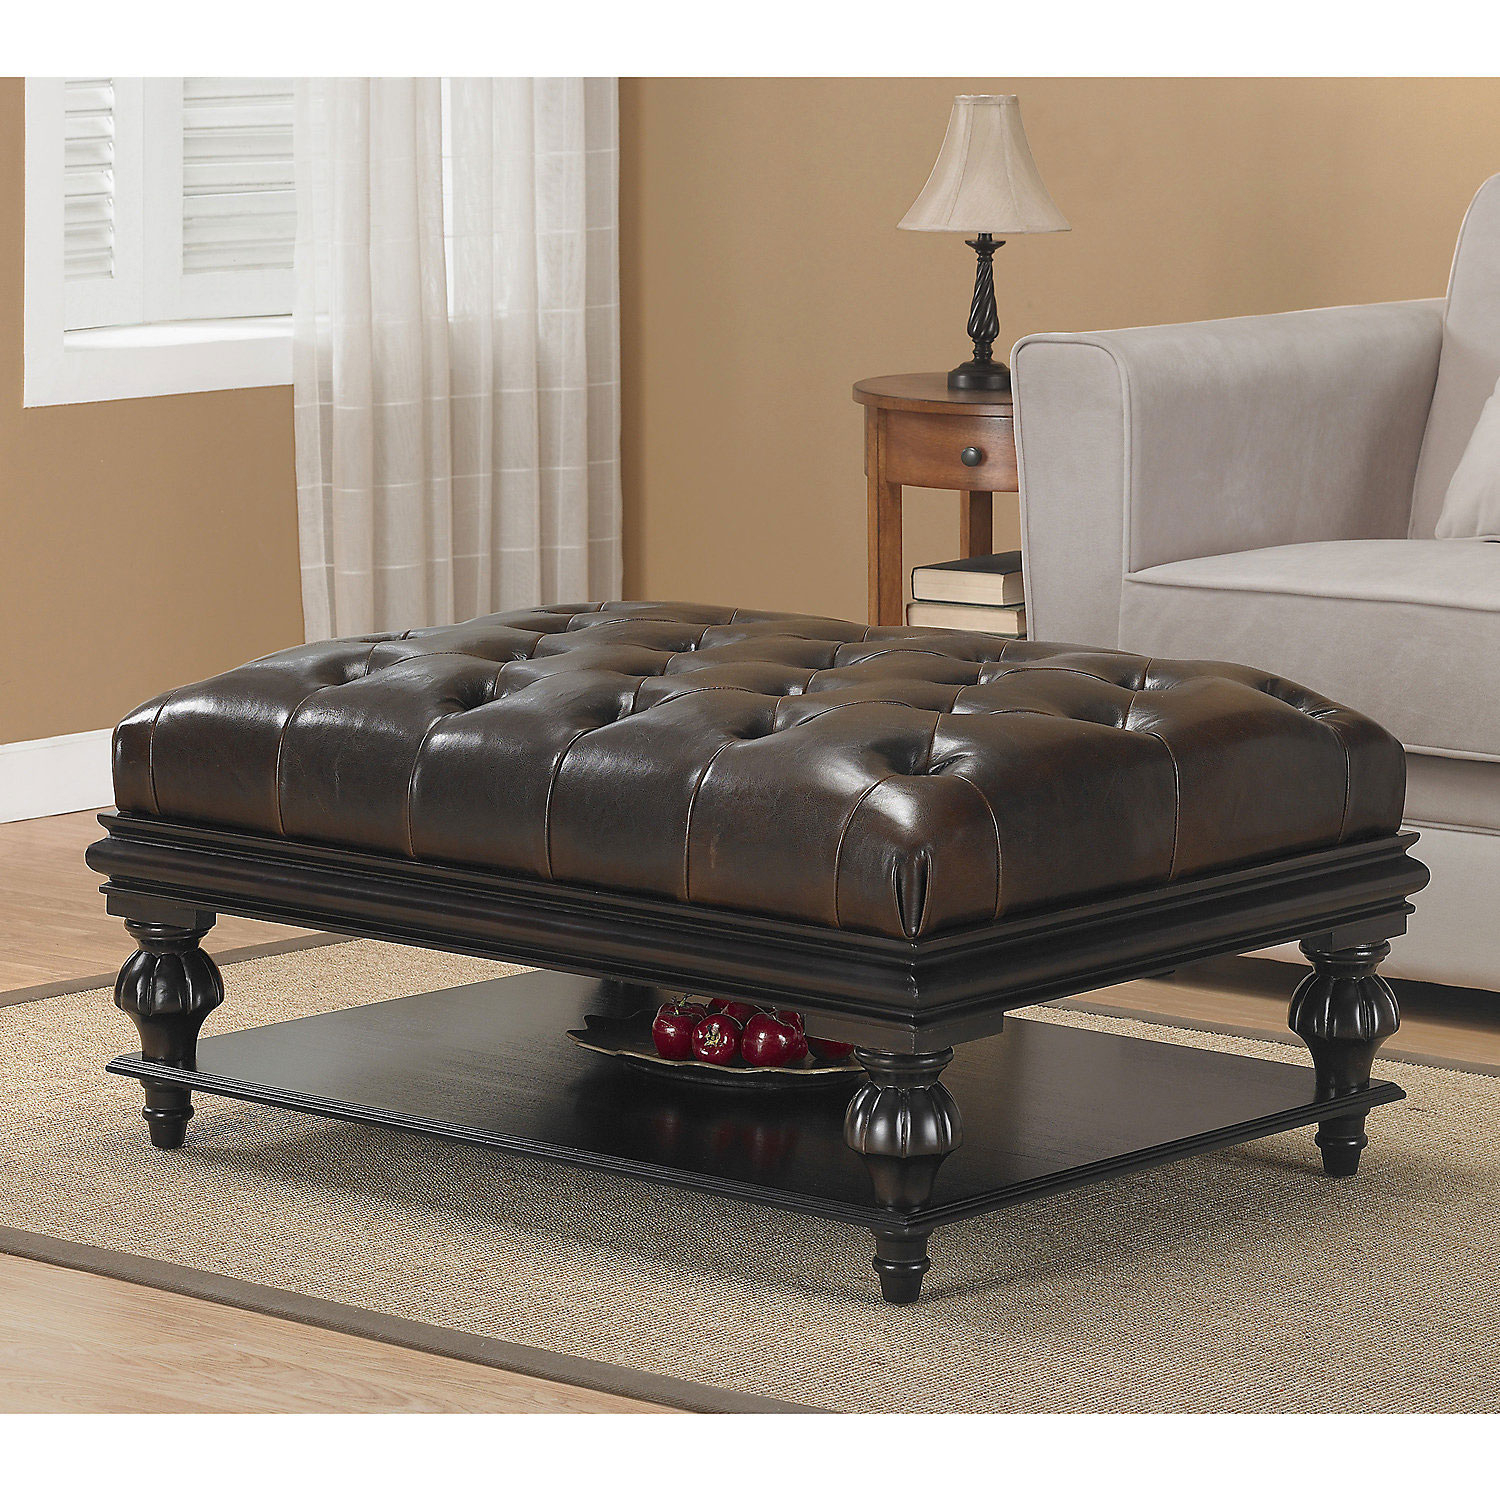 Buttontufted leather ottoman with shelf